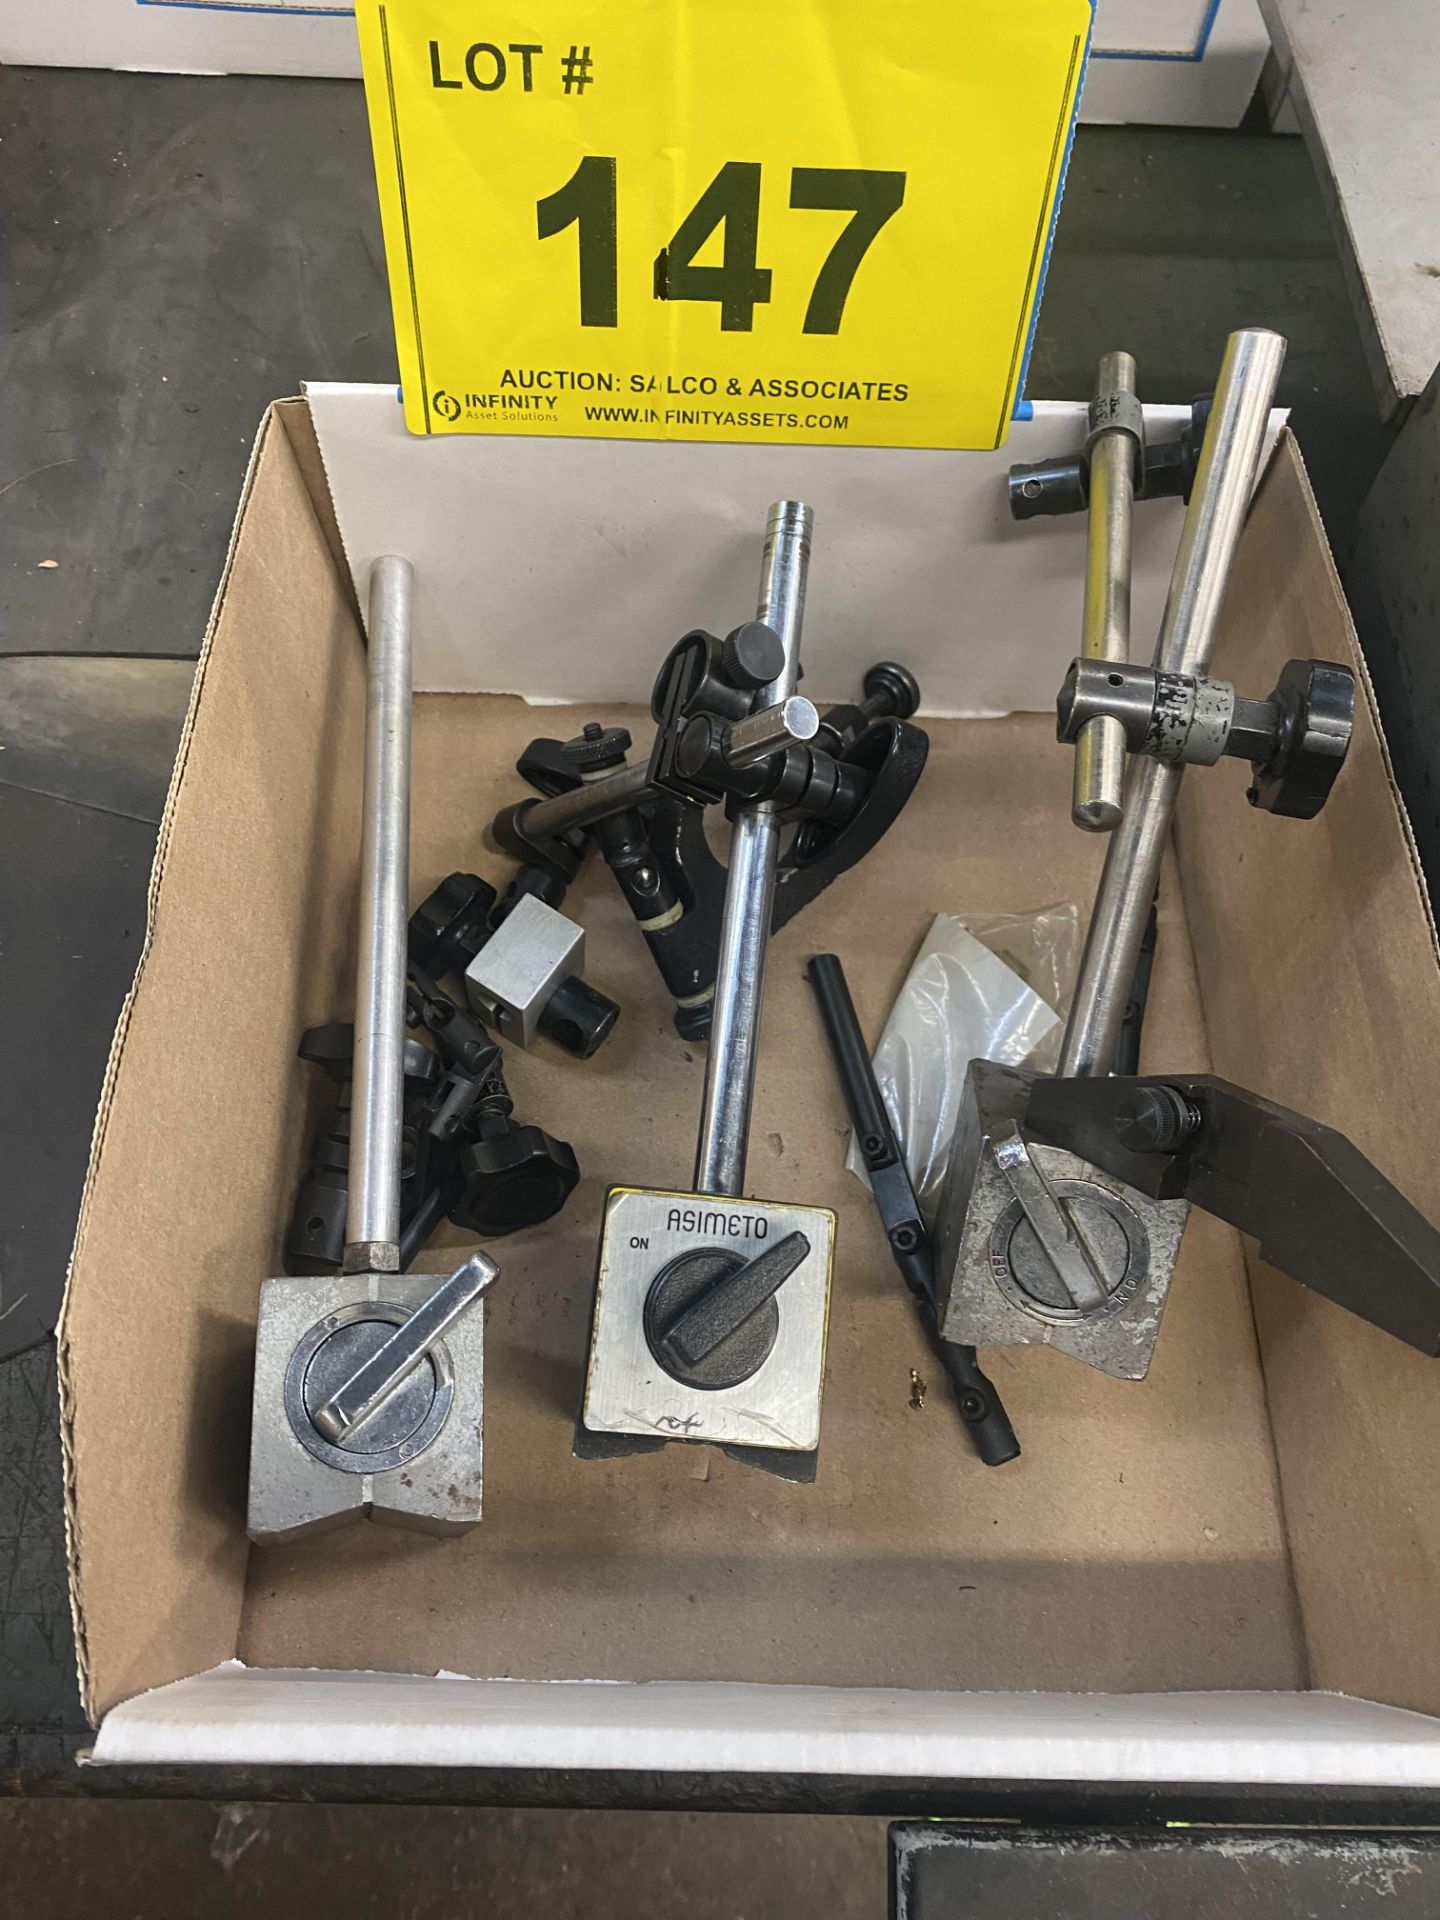 LOT MAGNETIC INDICATOR STANDS